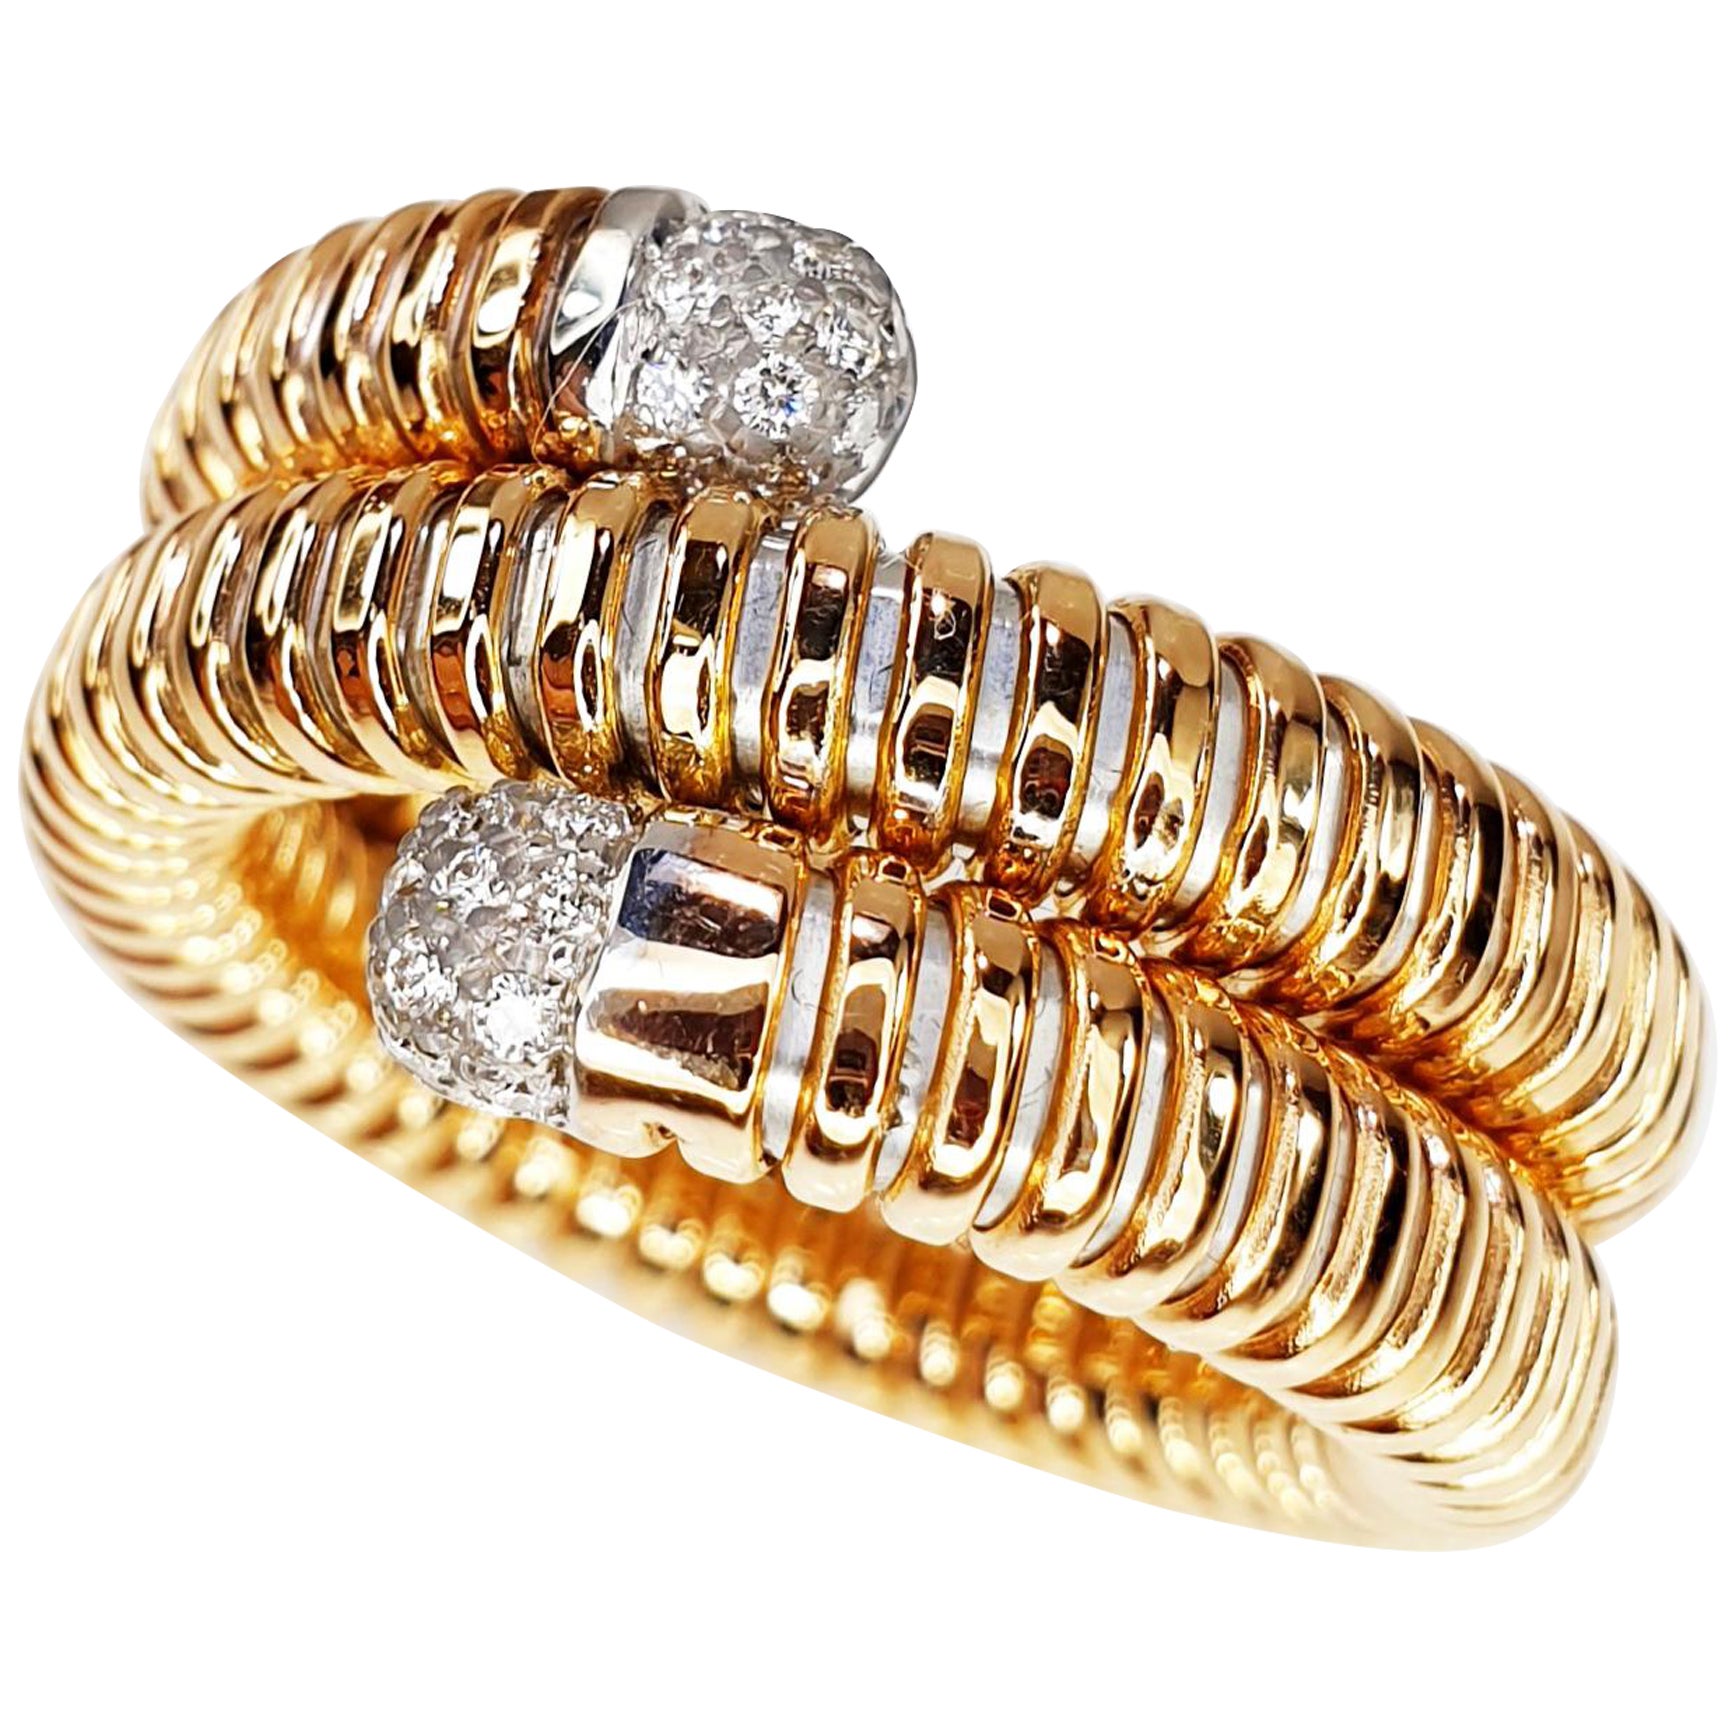 Flexible and adaptable ring with tubogas craftmanship that fits medium to large sizes.
Available in three colours of gold, yellow, white and rose. This listing is applicable to the  white  option. 
11,40gr and 0.25Carat Diamonds
Request availability